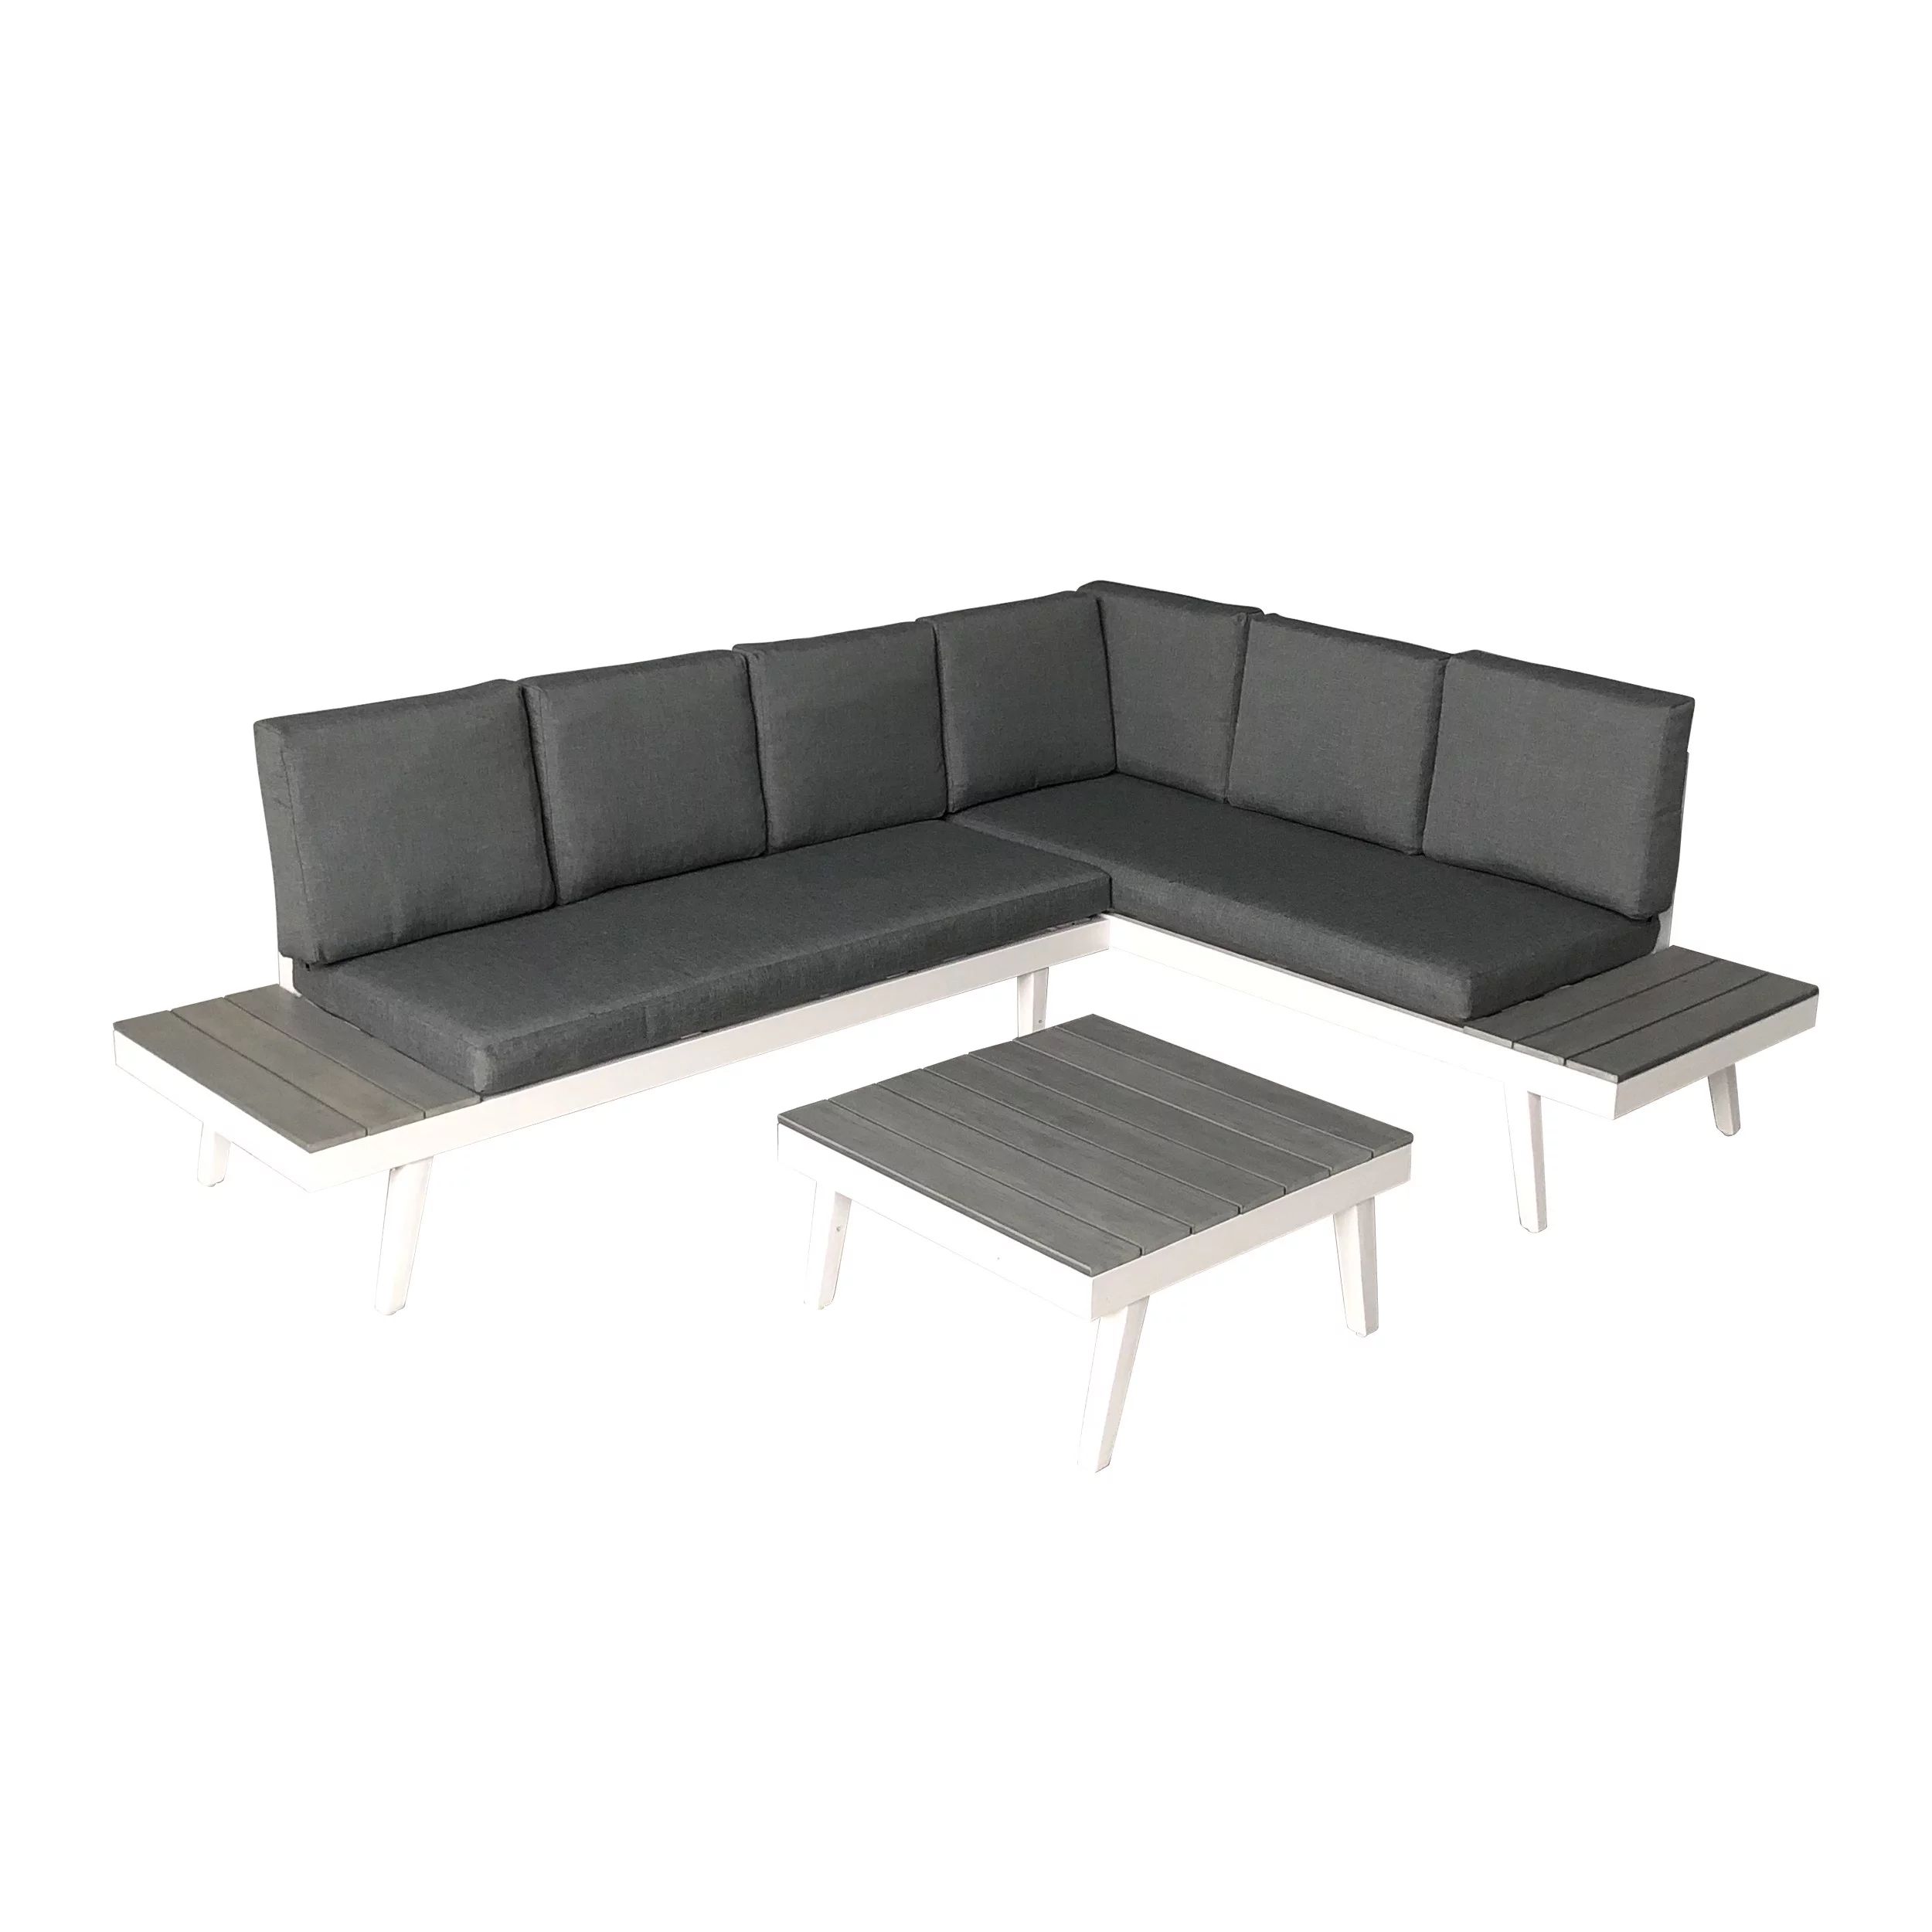 GDF Studio Taylor Outdoor Aluminum Sofa Sectional with Faux Wood Accents, White and Gray | Walmart (US)